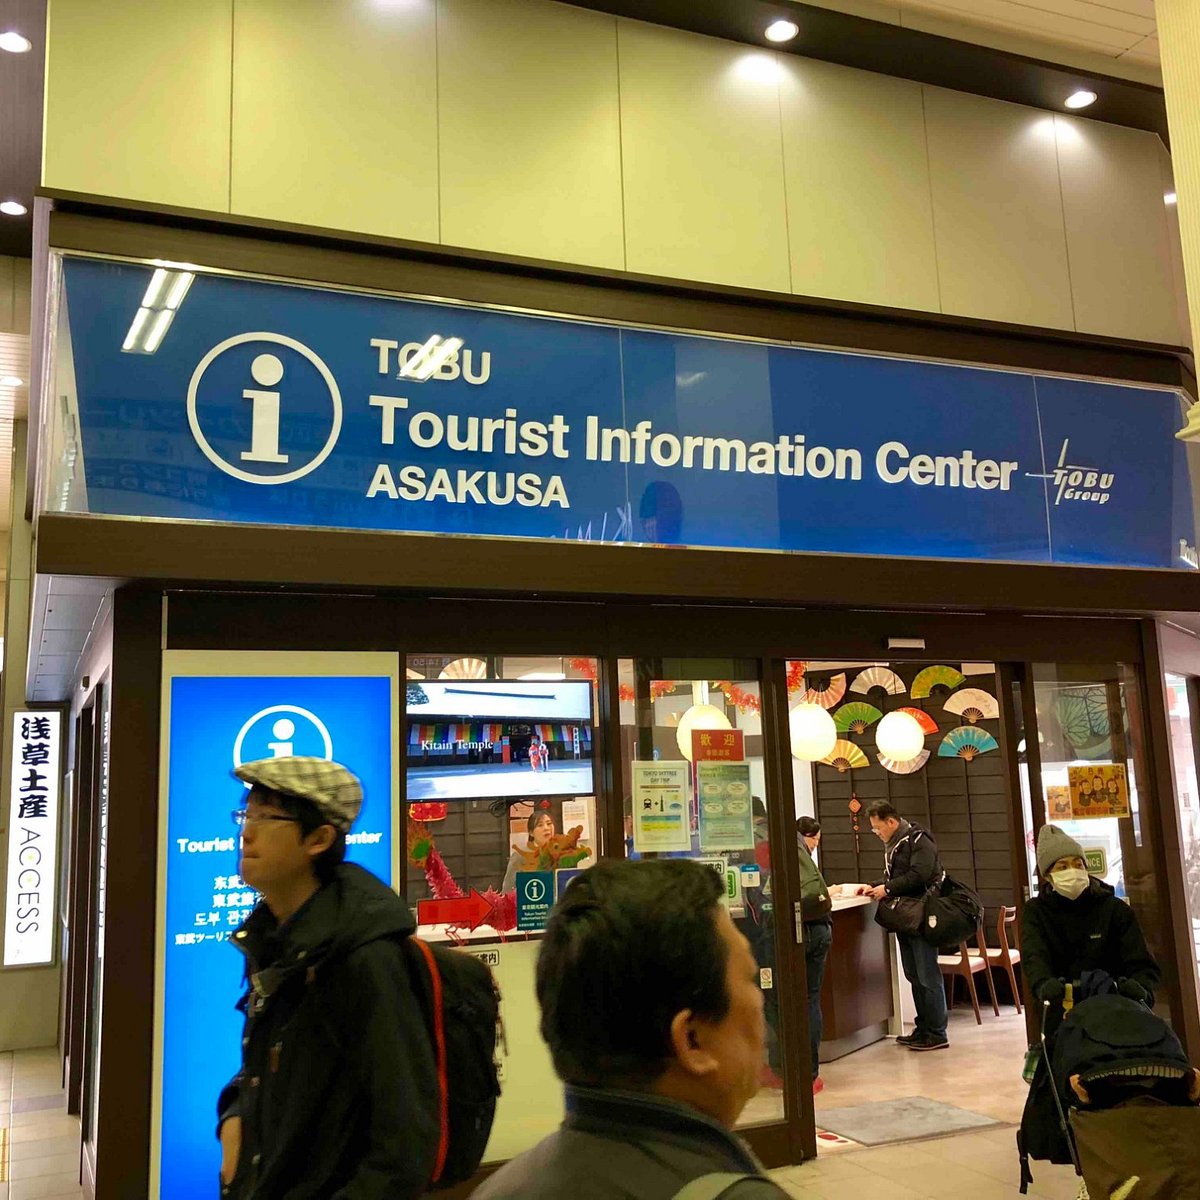 a tourist information center charges $10 per hour